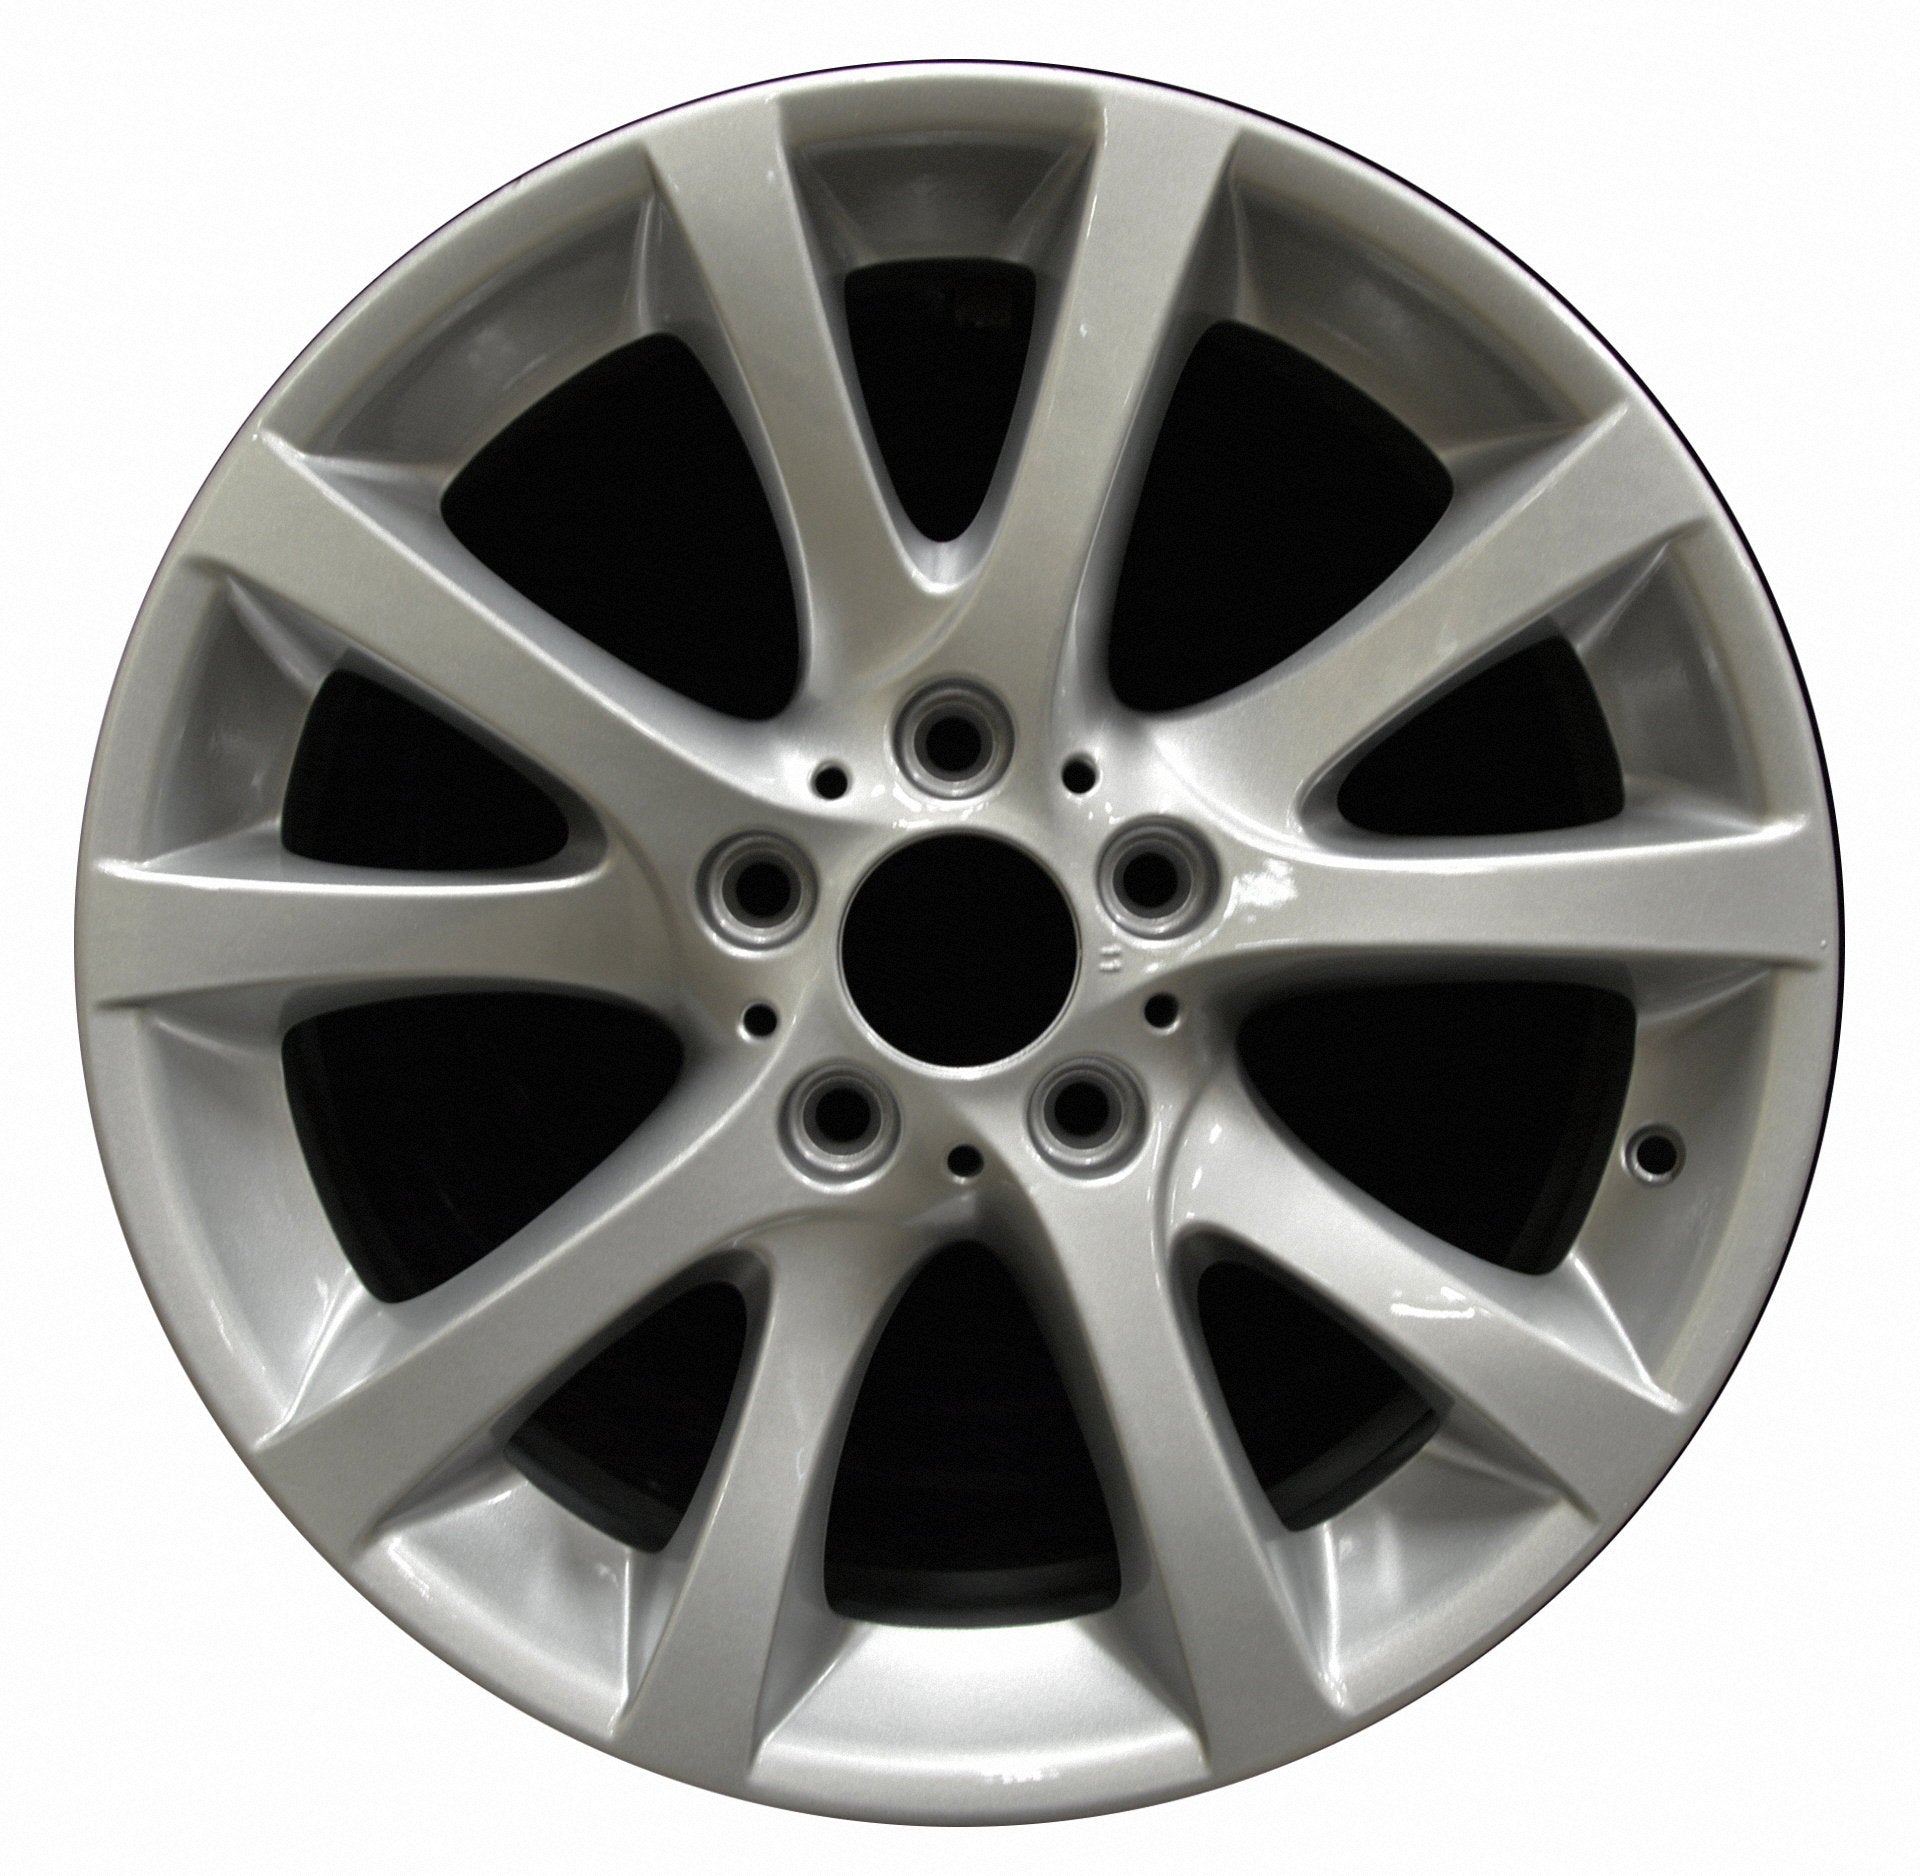 BMW 128i  2008, 2009, 2010, 2011, 2012, 2013 Factory OEM Car Wheel Size 18x7.5 Alloy WAO.71507FT.PS10.FF